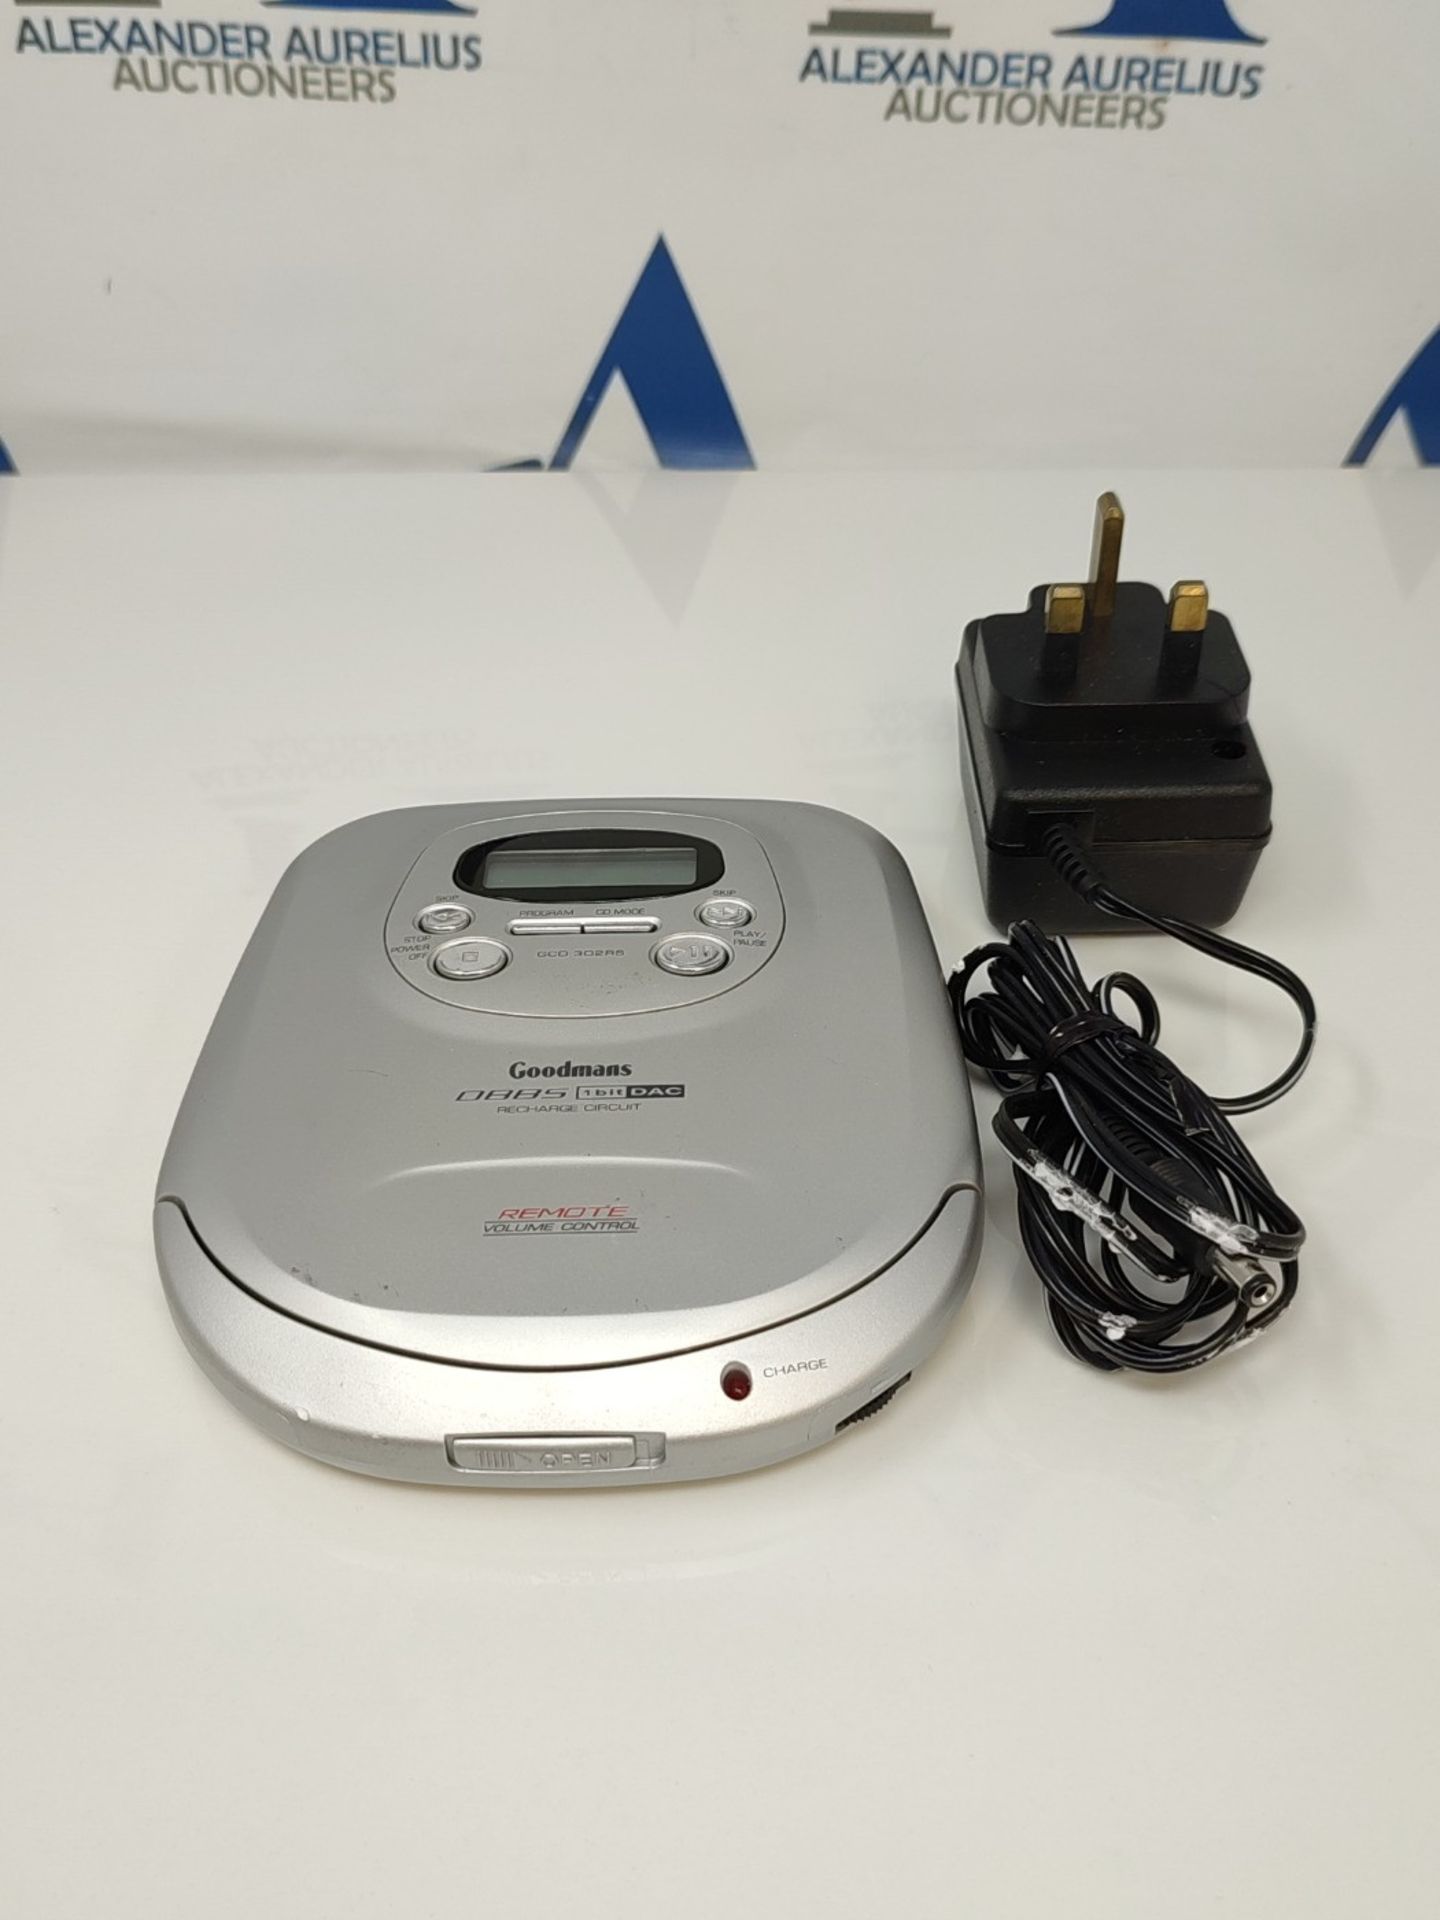 Goodmans CD Walkman GCD302RS Silver Battery Powered Personal Player - Image 2 of 2